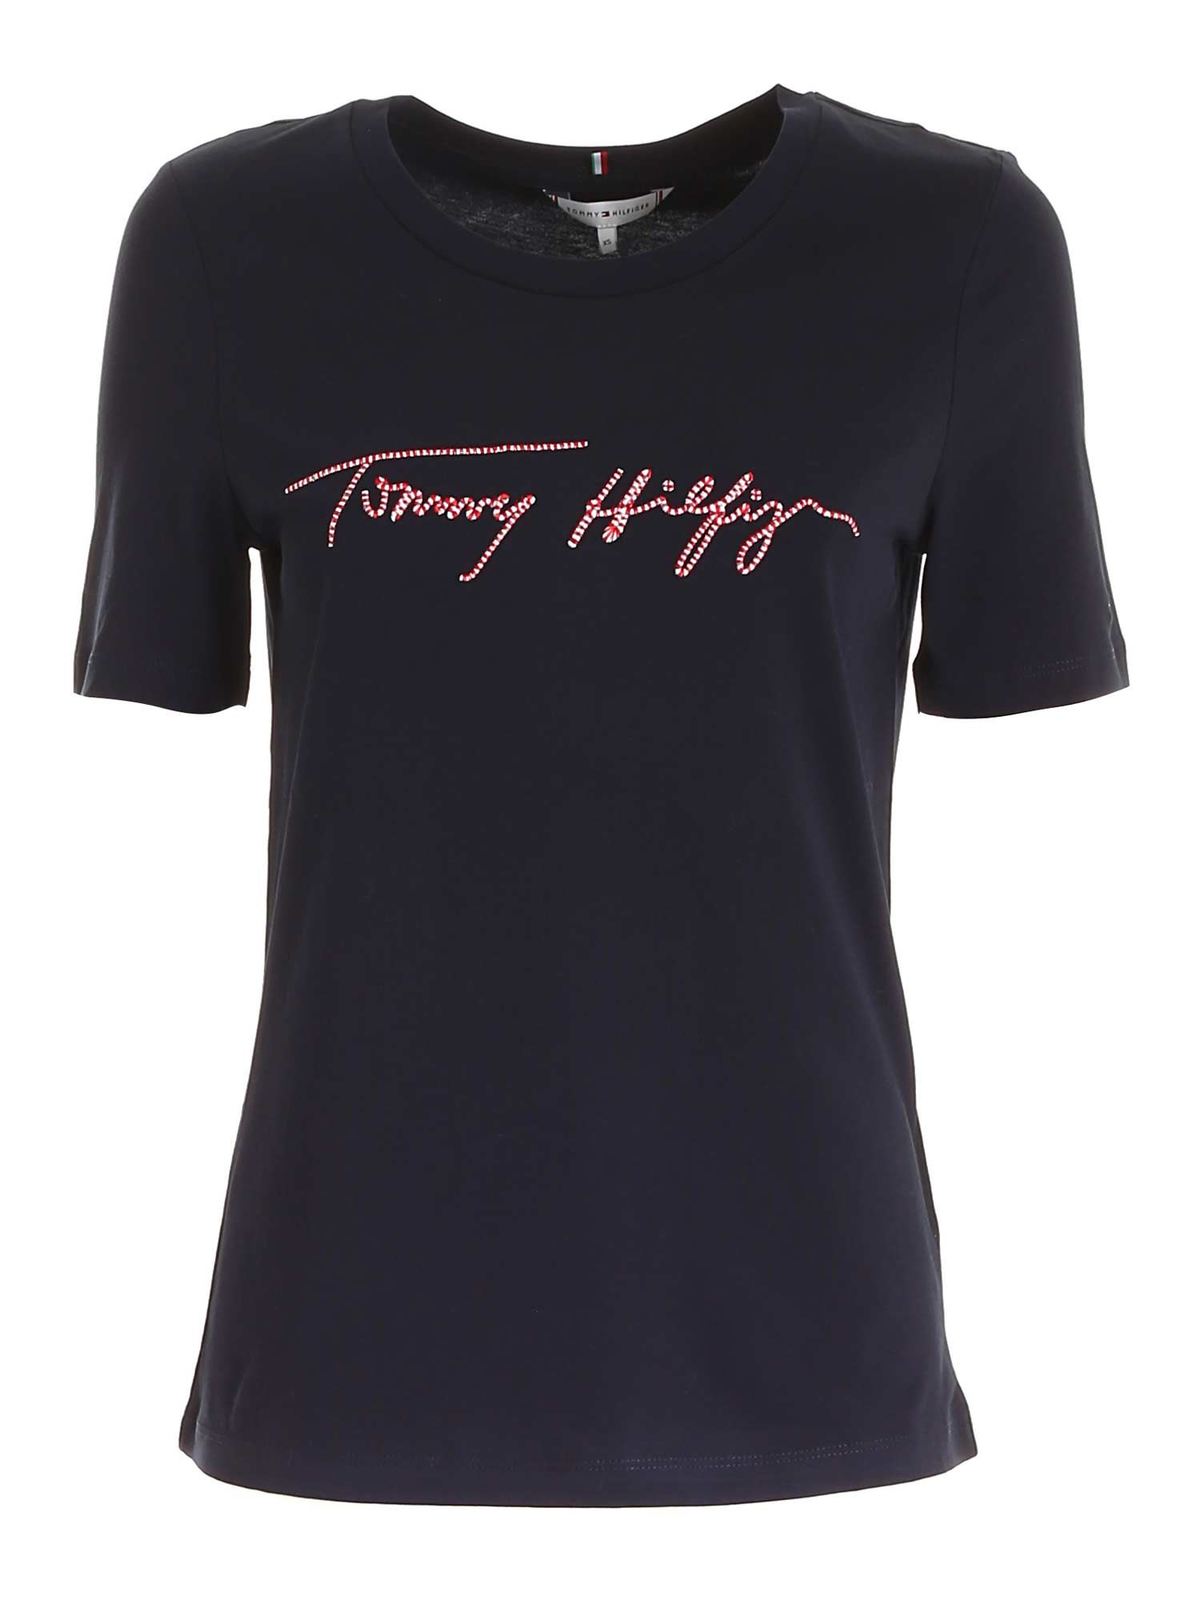 TOMMY HILFIGER LOGO EMBROIDERY T-SHIRT IN BLUE